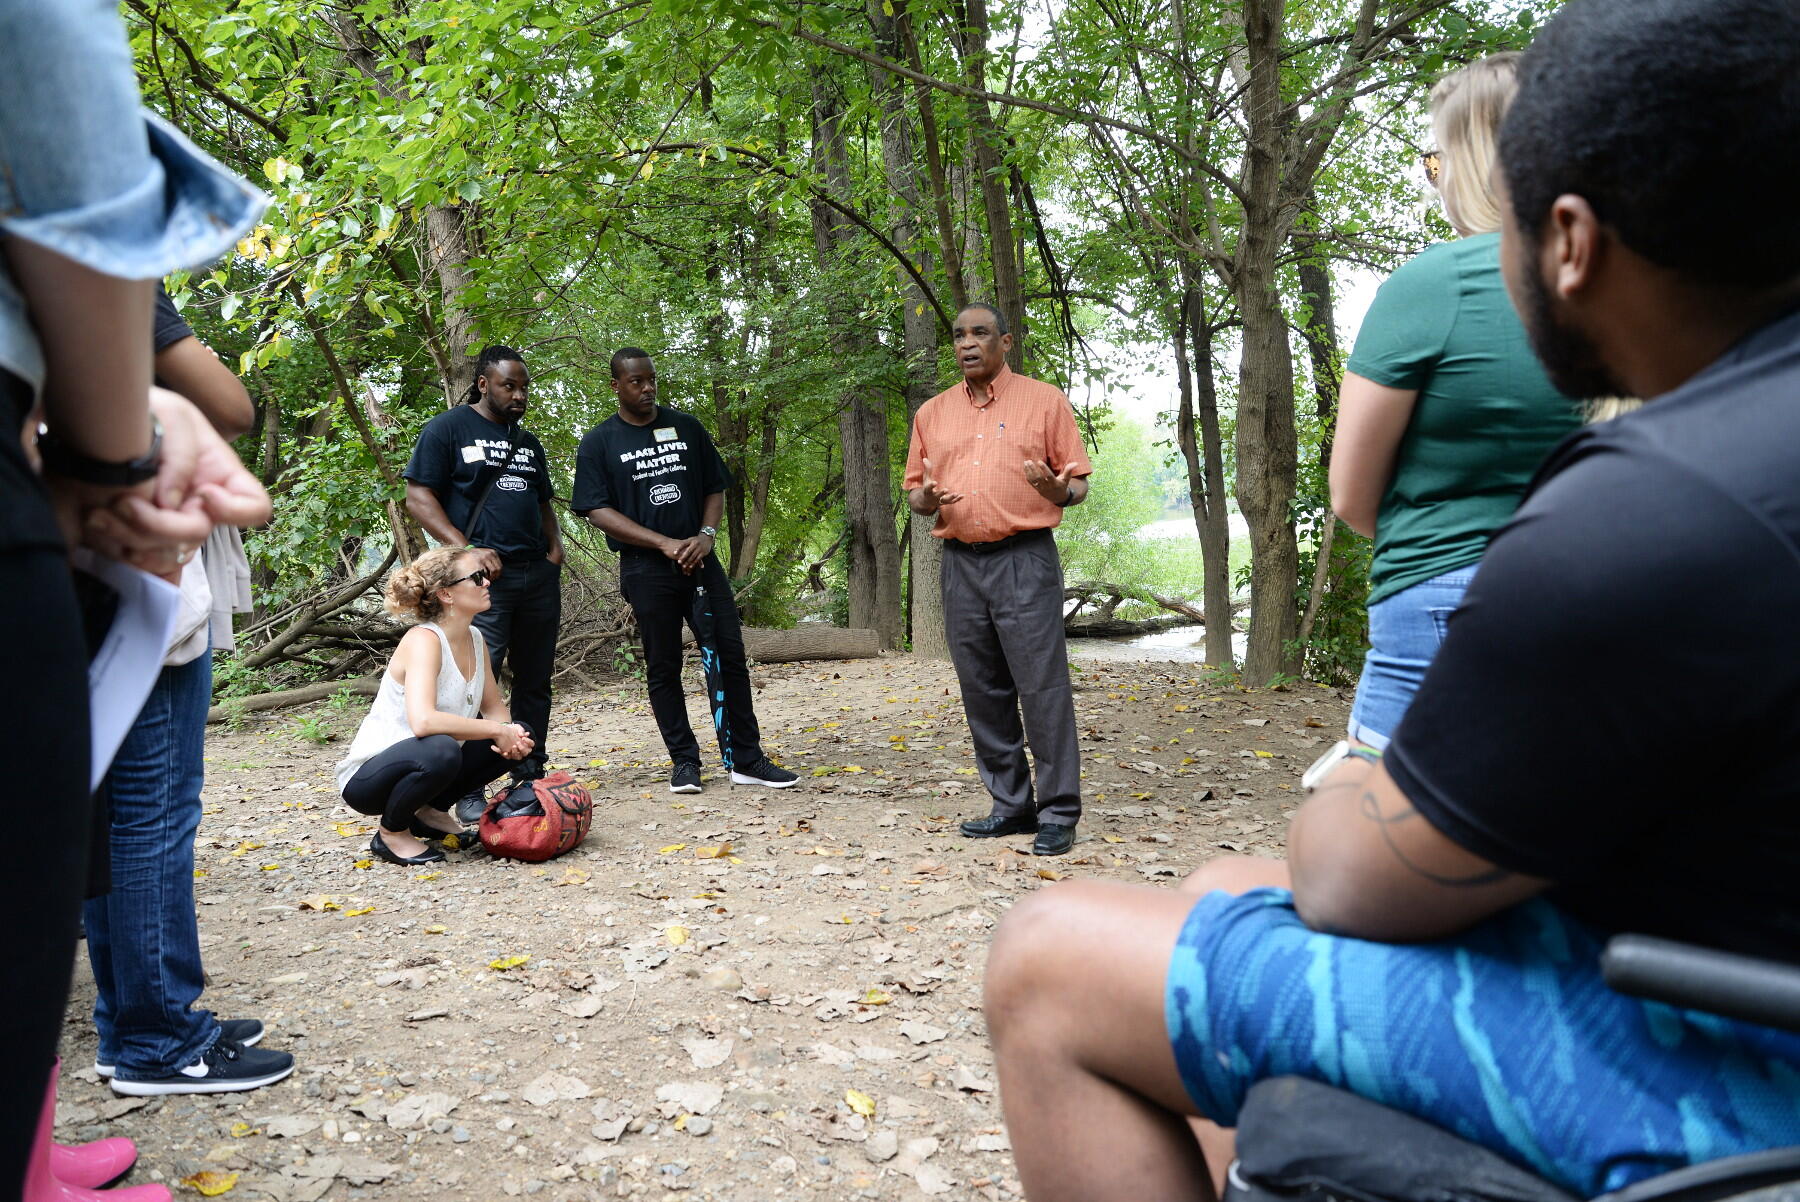 Rev. Sylvester L. "Tee" Turner, pastor of Pilgrim Baptist Church and a longtime Richmond community leader, talked at Great Shiplock Park about Richmond's history and how the impact of "post-traumatic slavery syndrome" continues to be felt today.